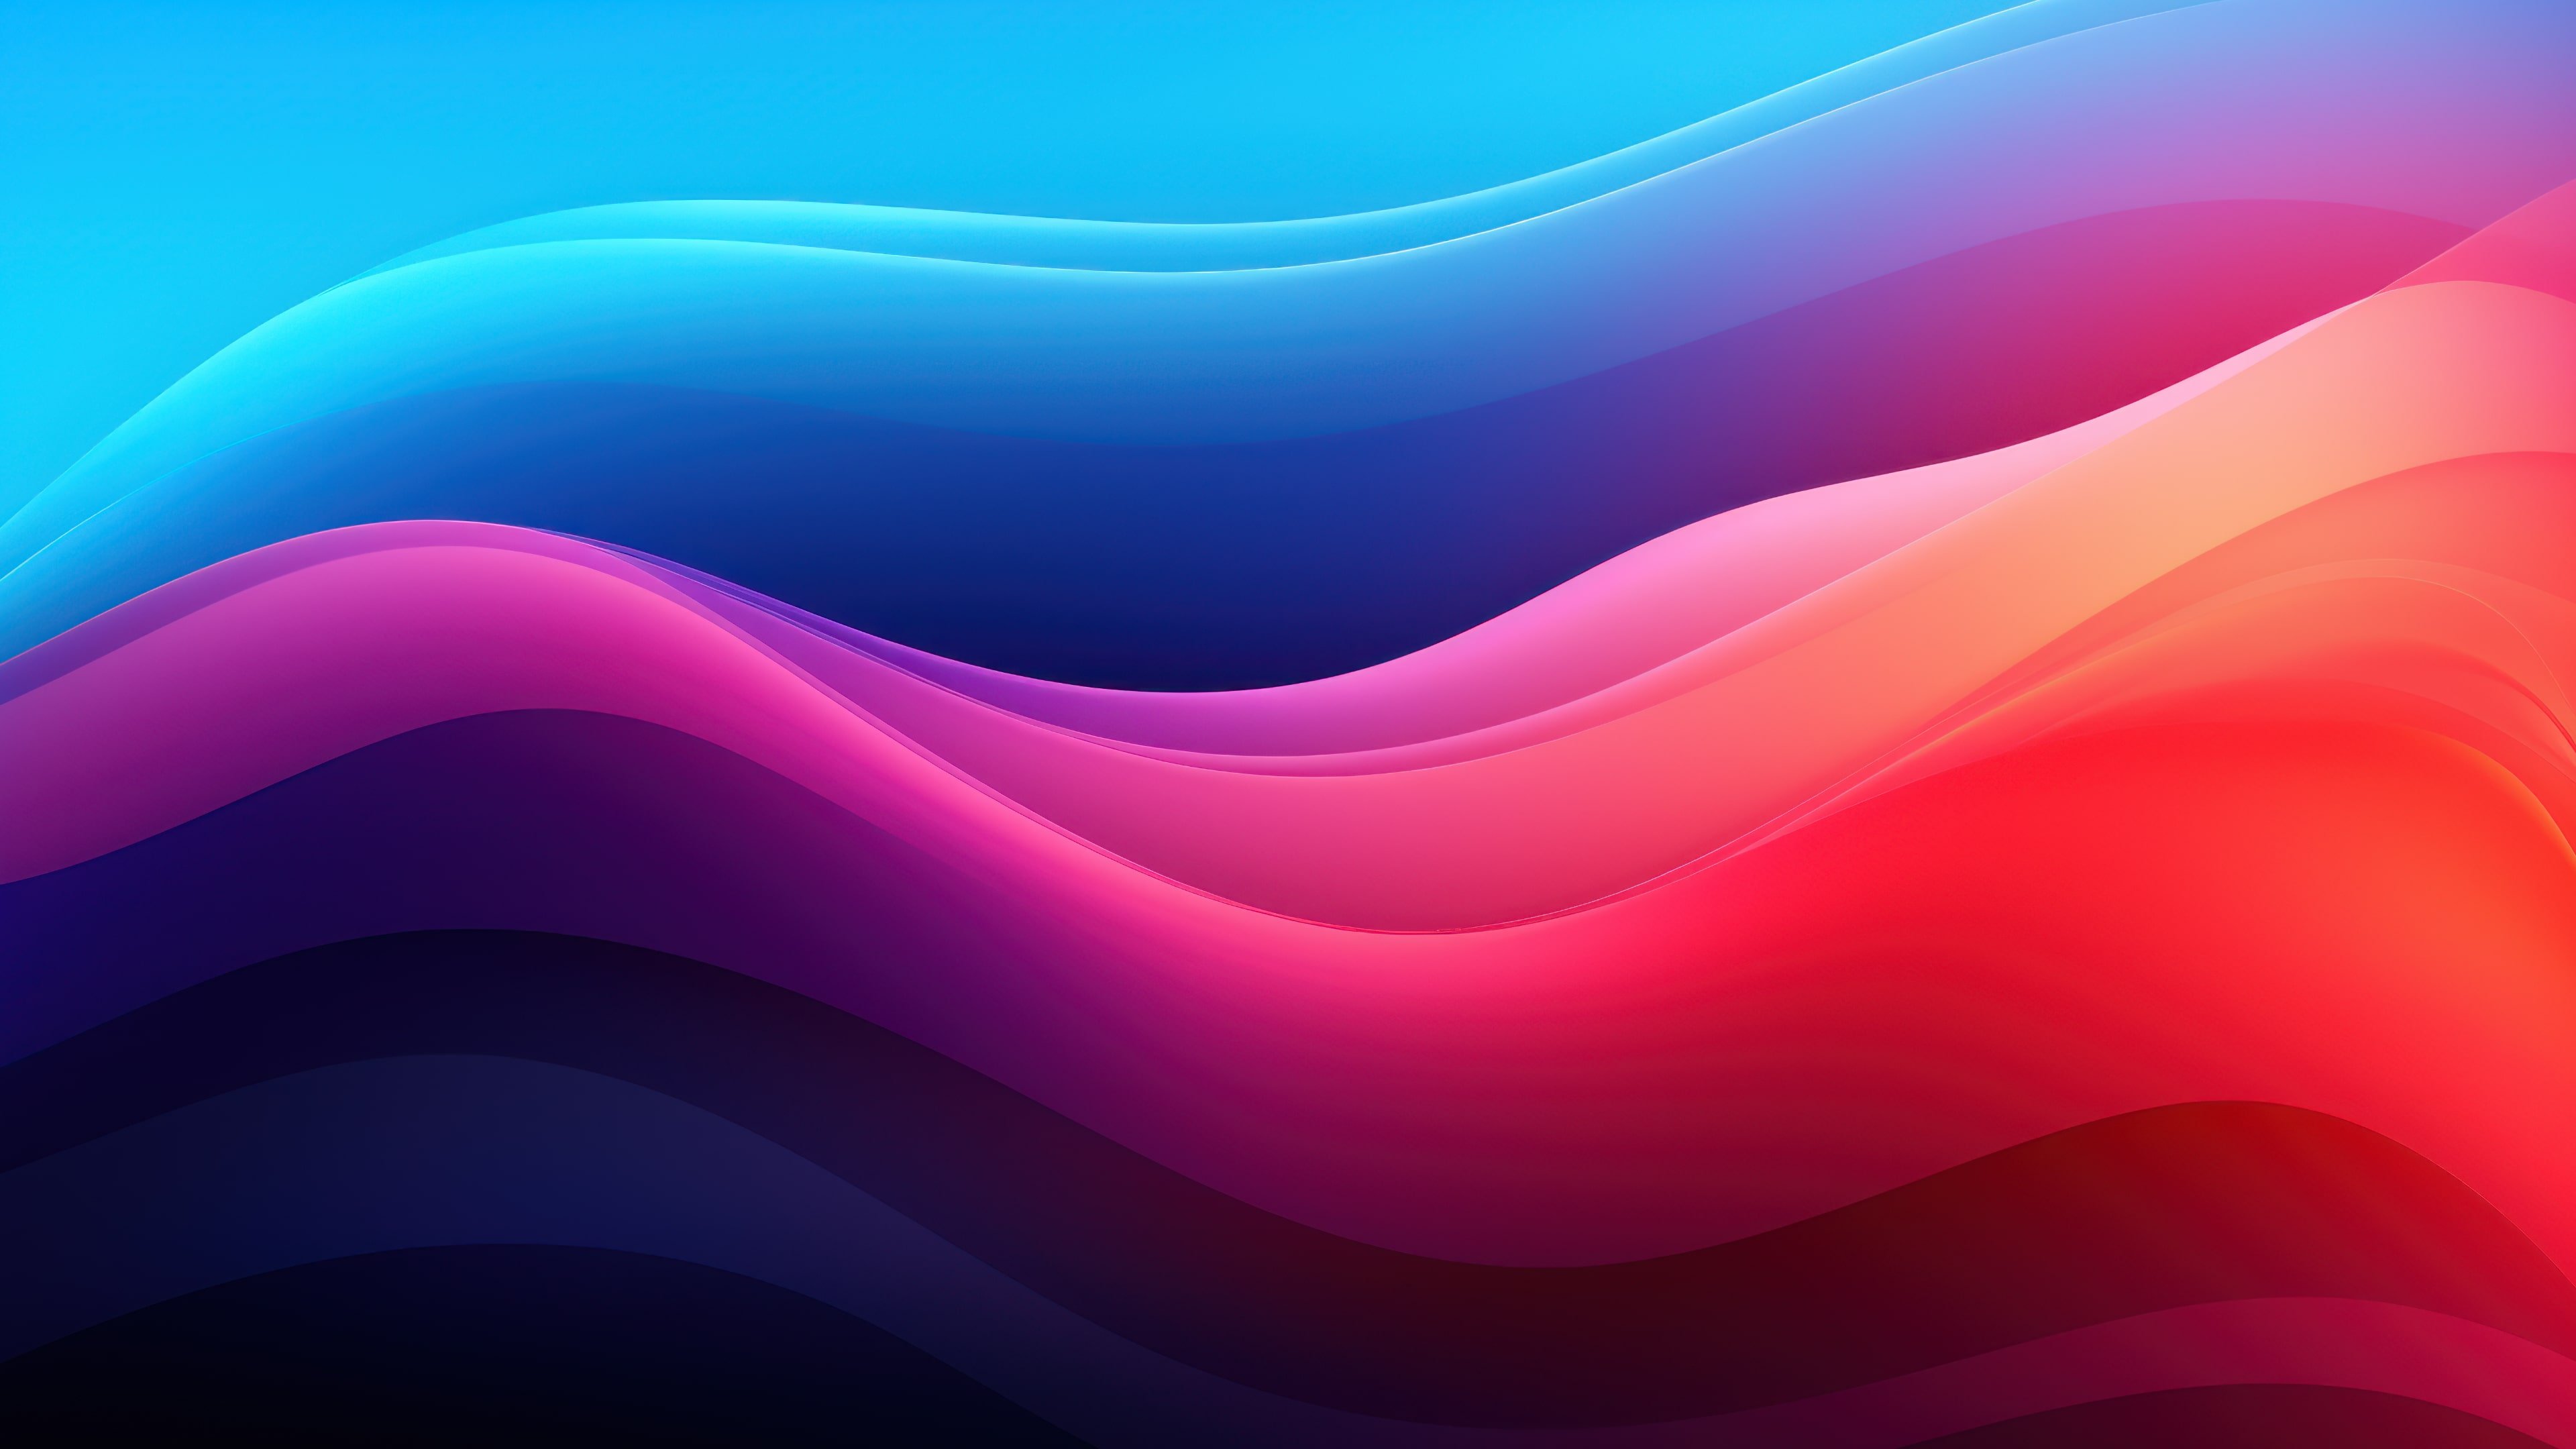 Pixground – Download High-Quality 4K Wallpapers for Free